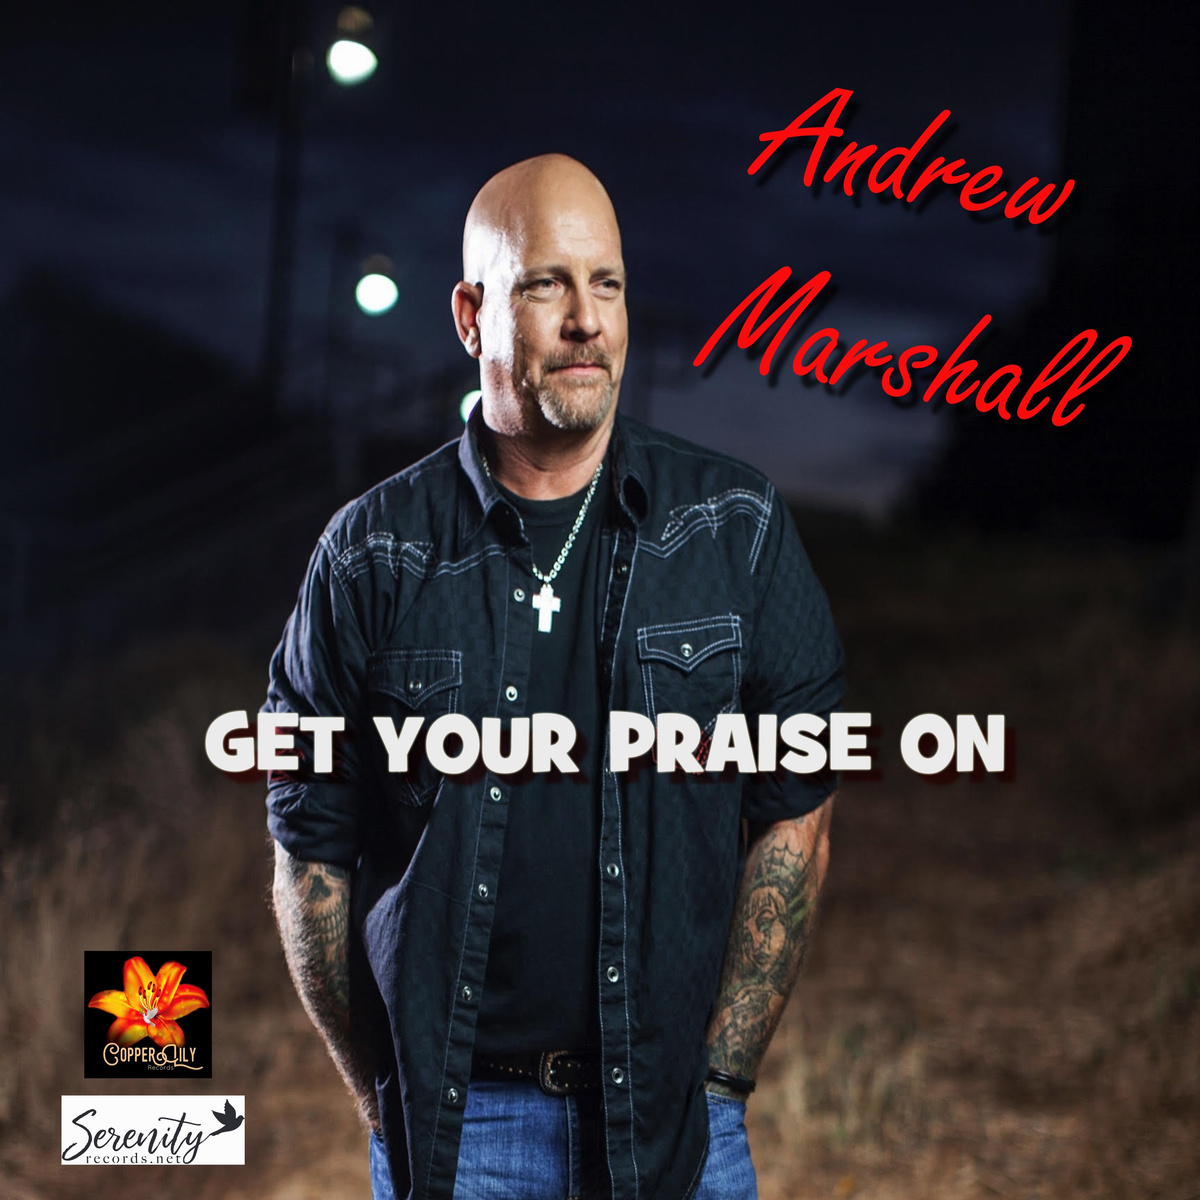 Louder Than The Music Andrew Marshall Releases Get Your Praise On Single